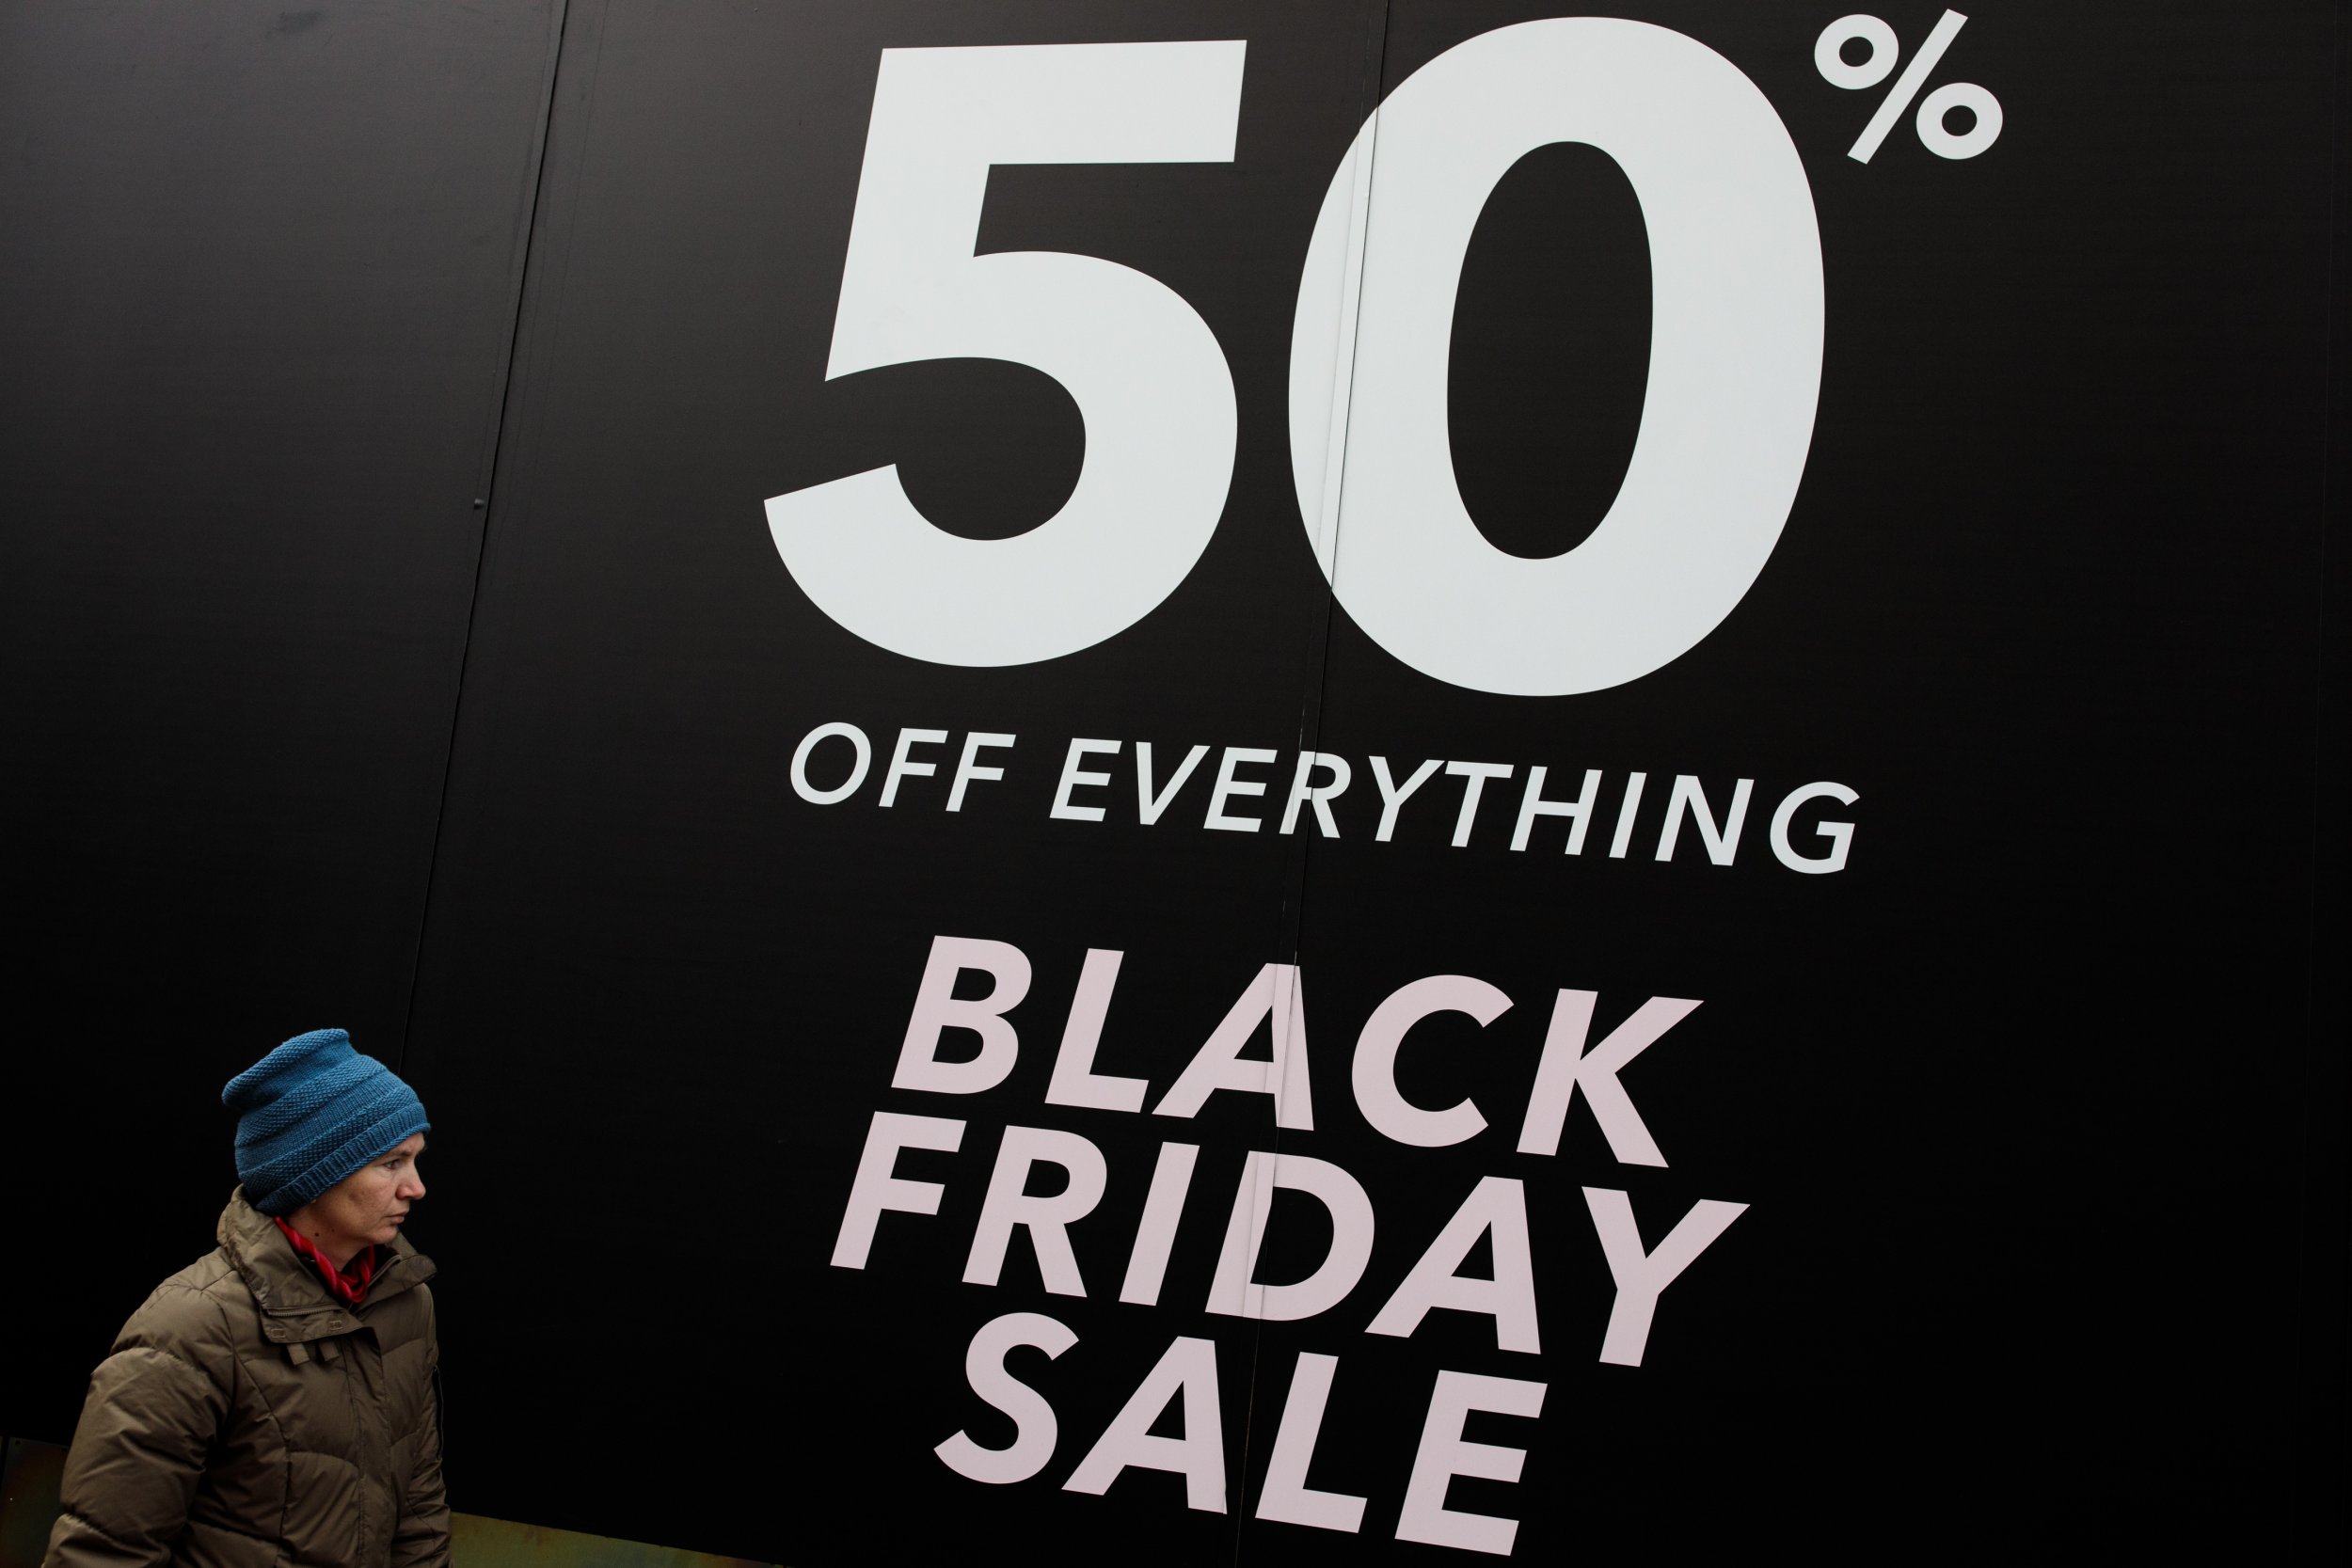 What Time Do Stores Open On Black Friday - What Stores Open At 4am On Black Friday